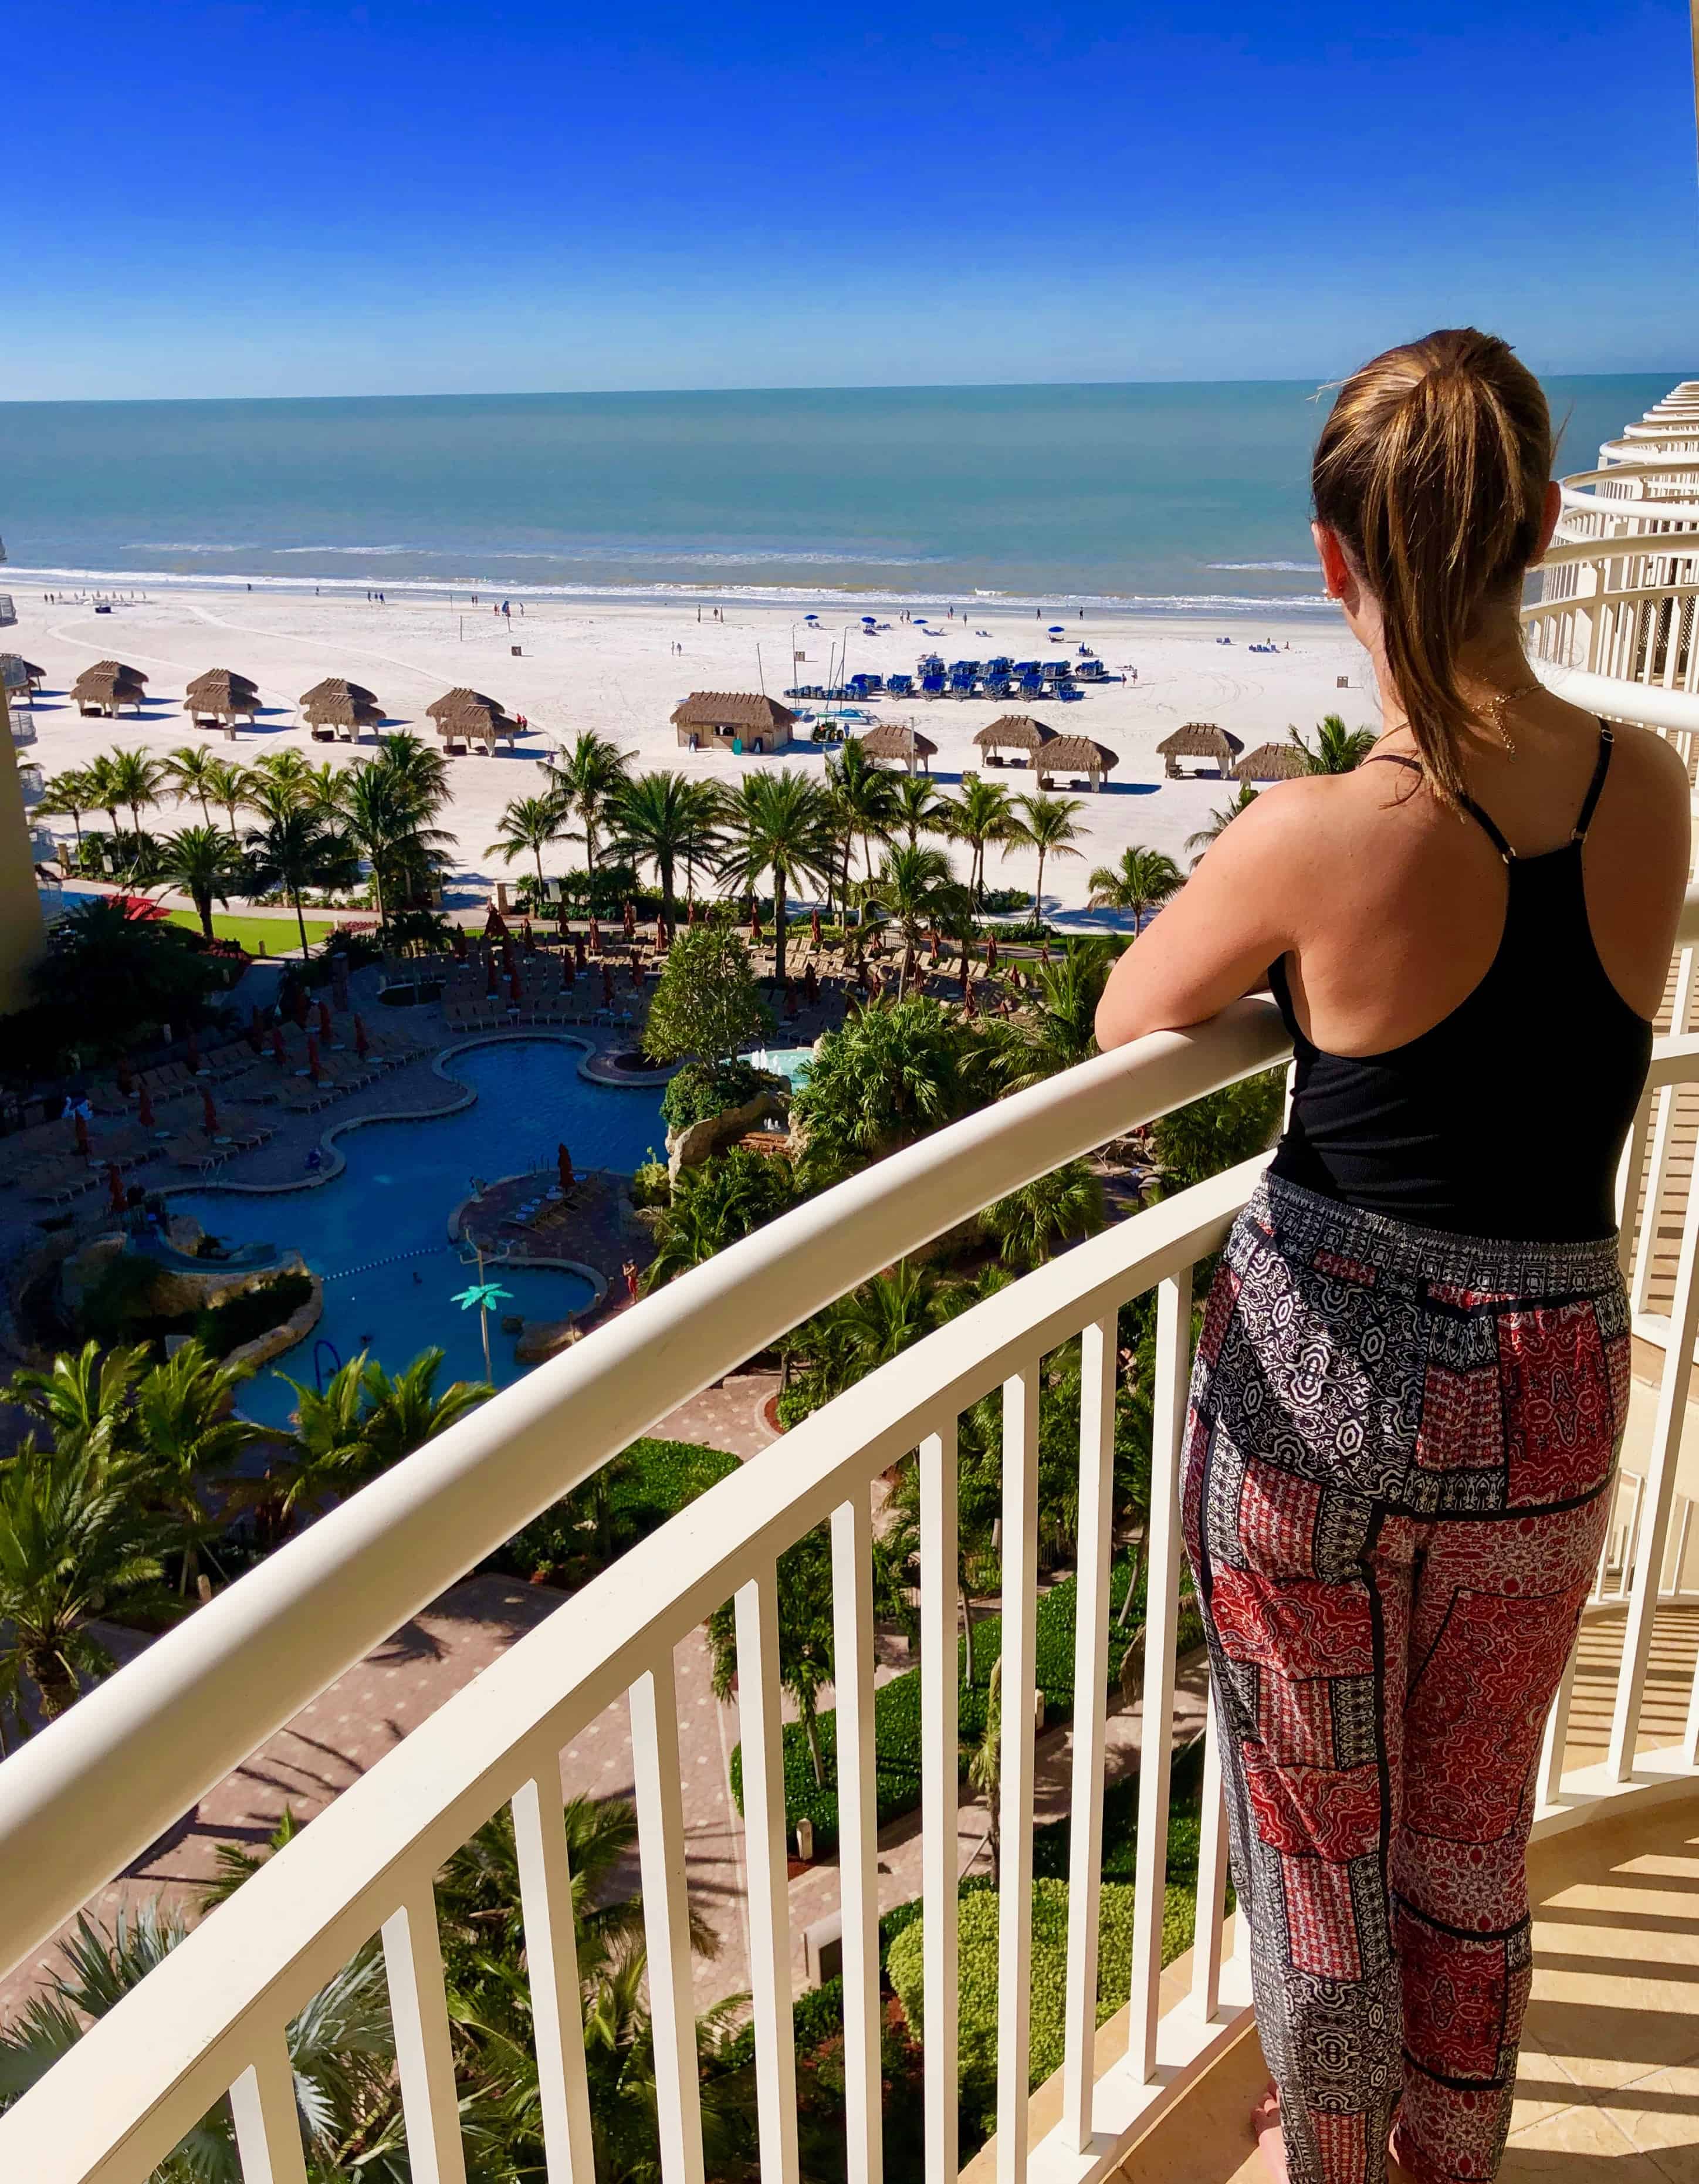 Marco Island is a beautiful place to visit, especially in the Winter when temperatures at home are chilly. Known for its shelly beaches and fresh seafood, you're in for a treat!